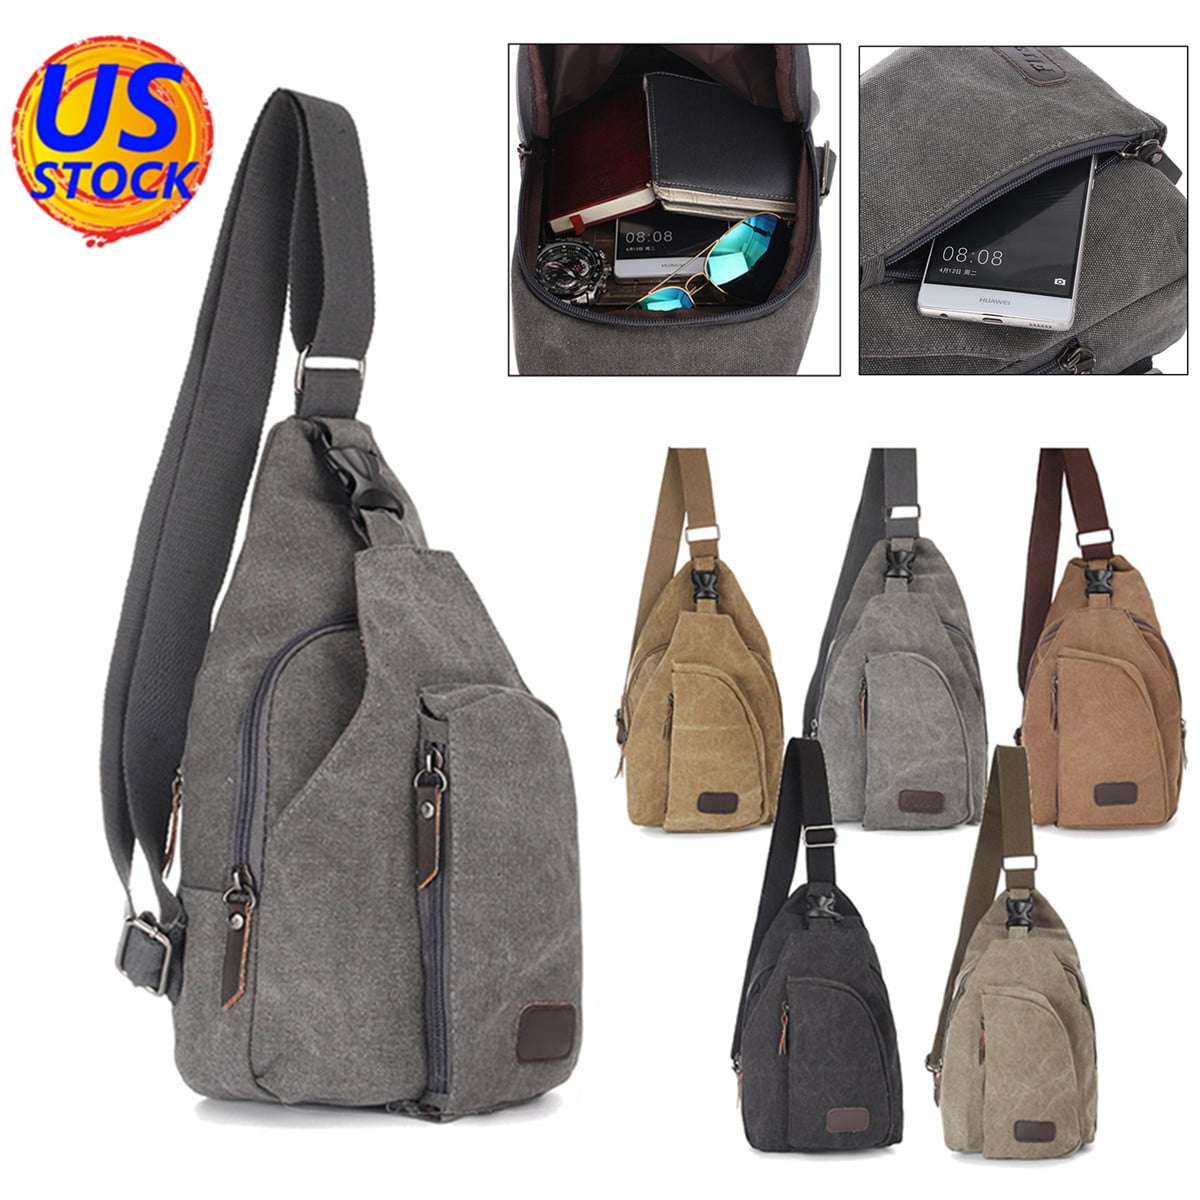 Small Canvas Messenger Bag Tactical Crossbody Casual Pack For Hiking & Traveling 